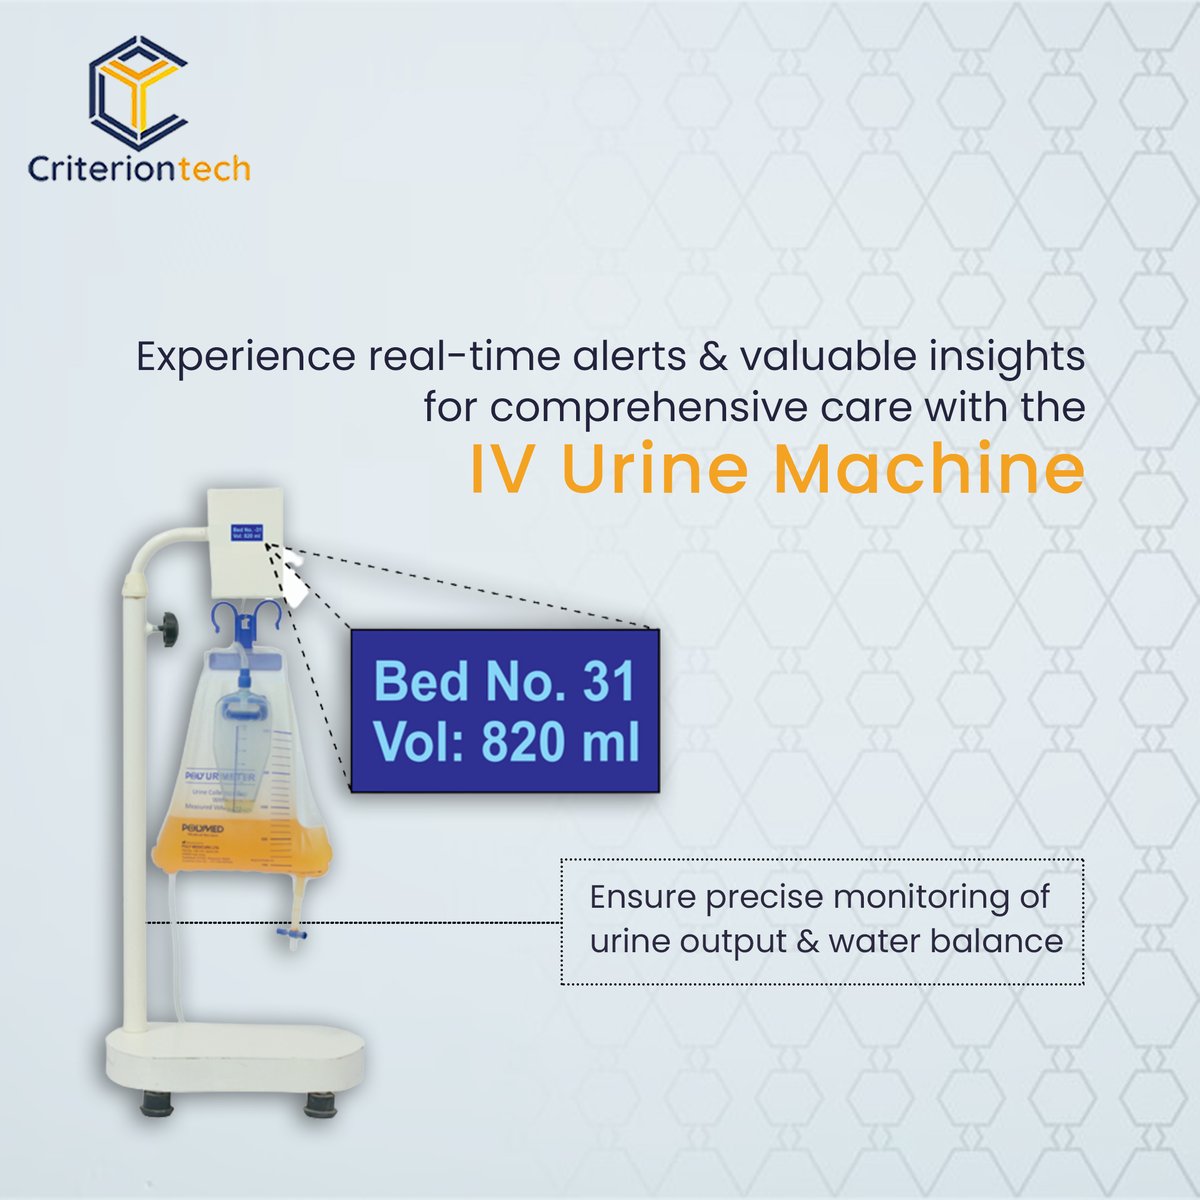 Stay ahead in patient care with our IV Urine Machine

Learn more at: criteriontechnologies.com/urine-machine.… 
🌐🏥 
.
#HealthCare #PatientMonitoring #RealTimeMonitoring #ComprehensiveCare #PatientOutcomes #HealthTech #MedicalInnovation #DigitalHealth #Criteria4Technology #CriterionTech